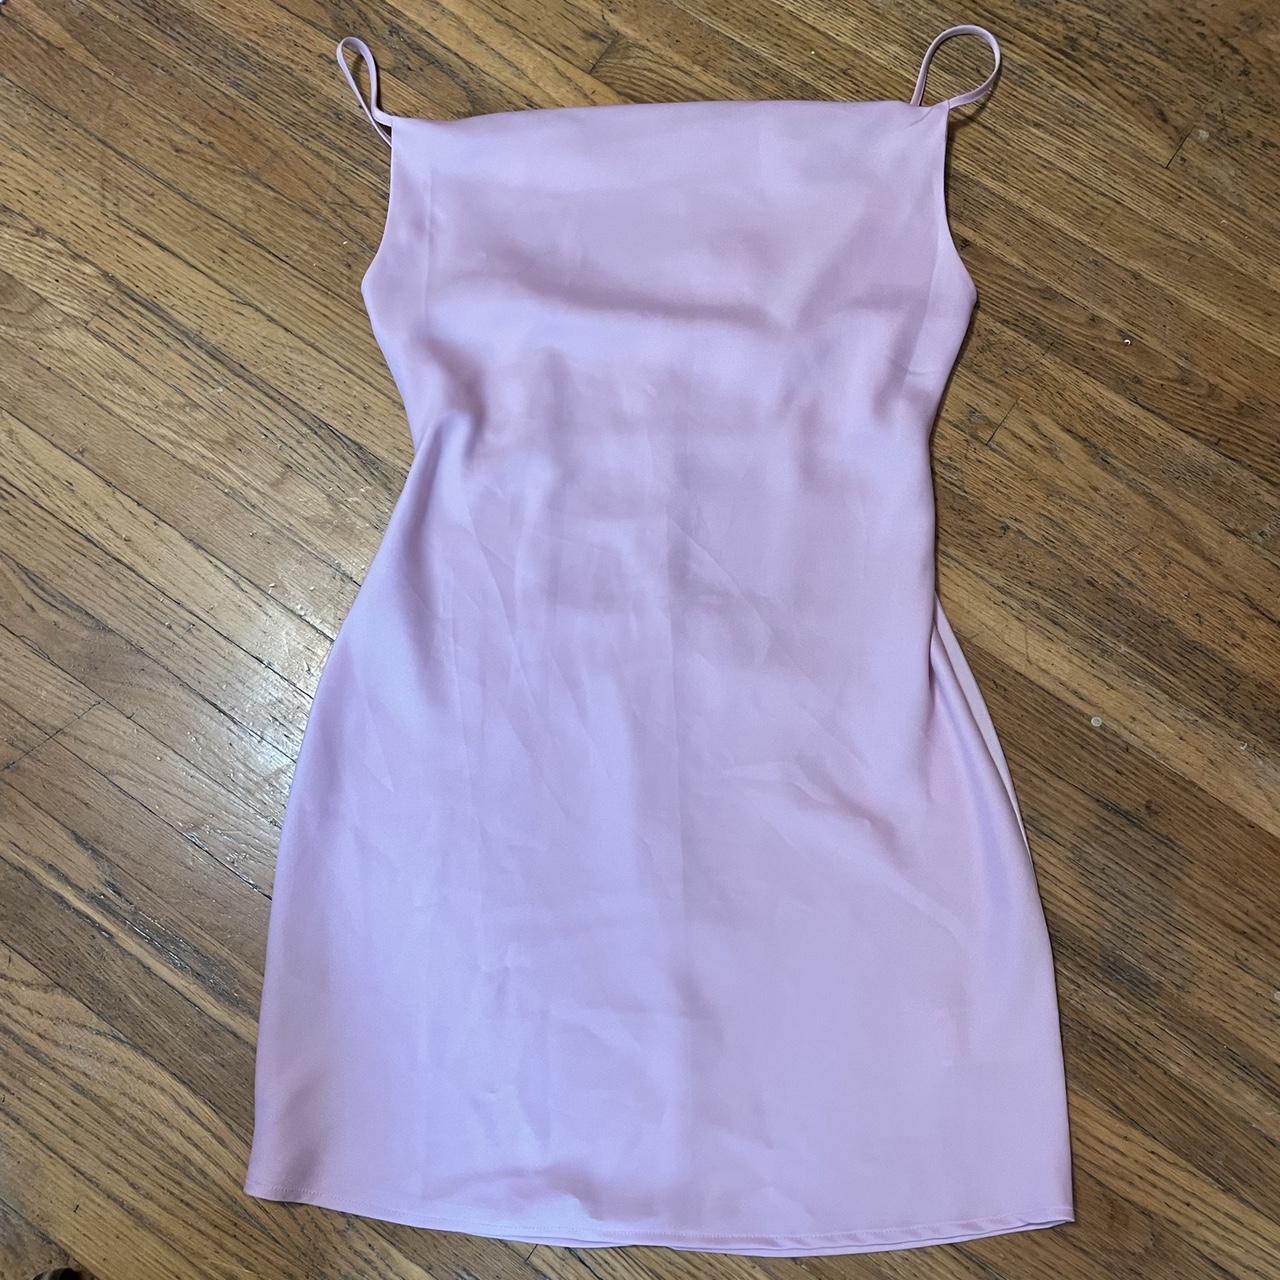 Great pink slip dress - never worn Size 2 small...